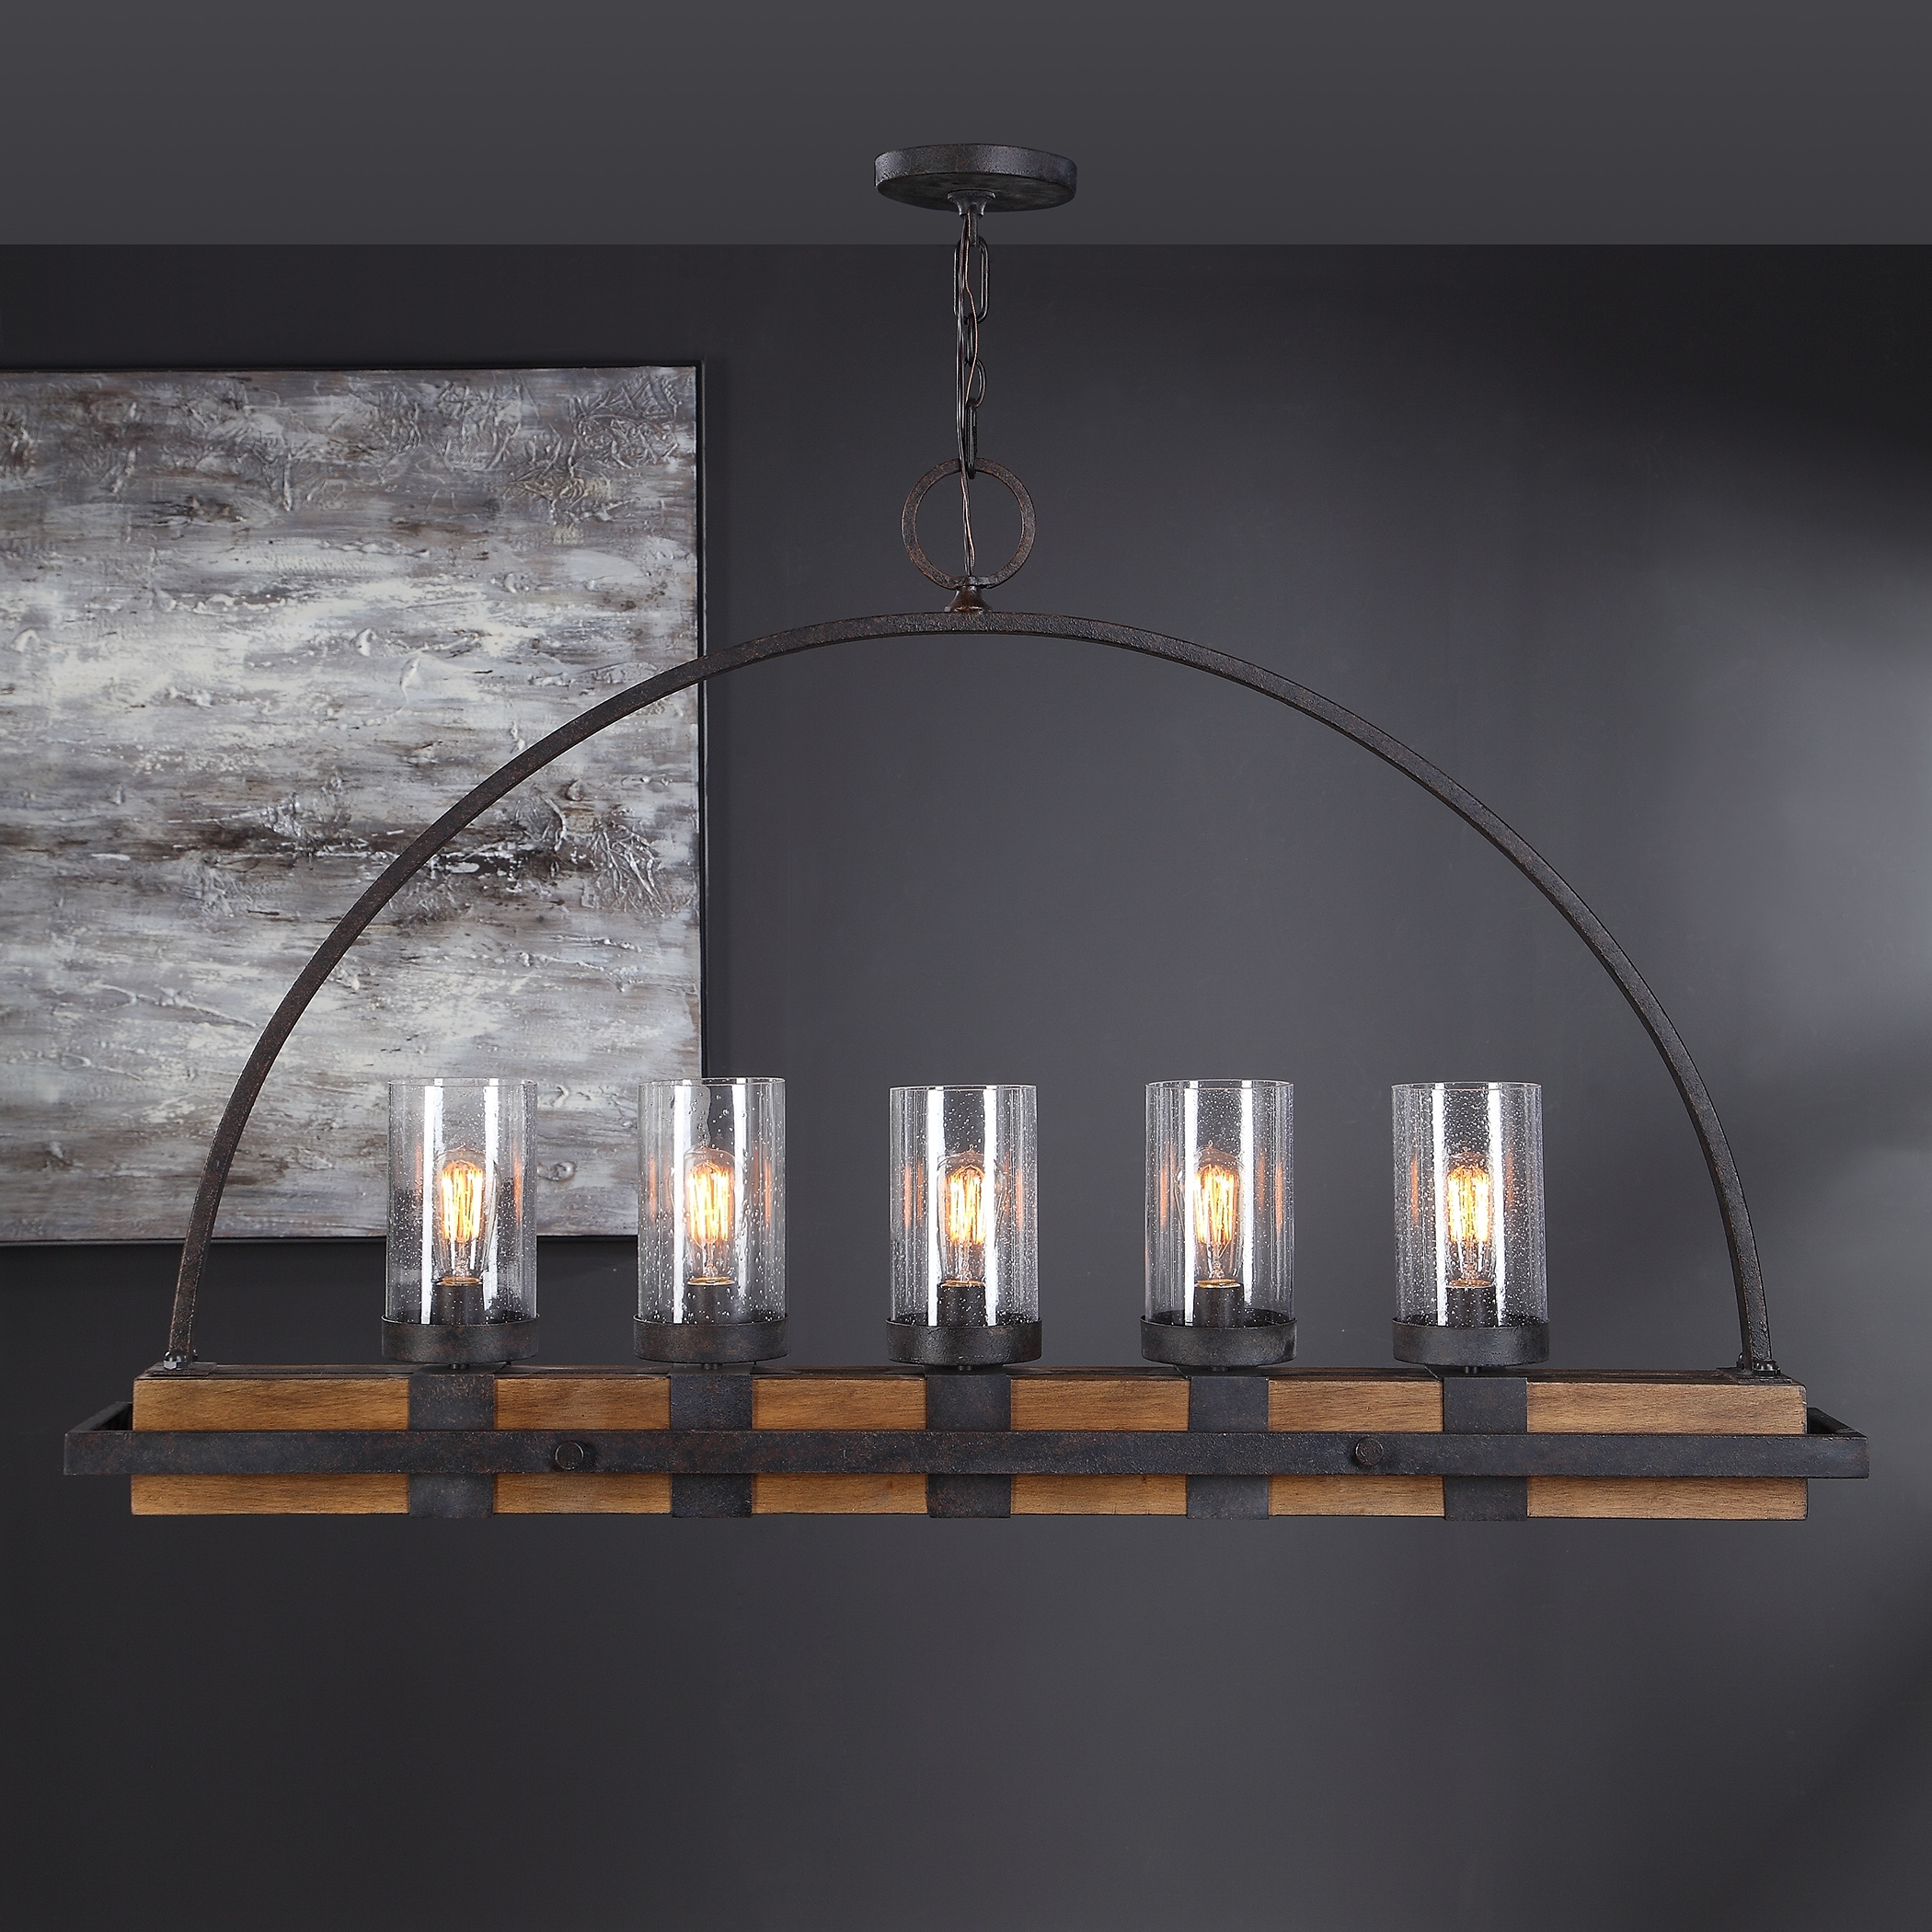 Atwood Rustic Linear Chandelier, 5 Light - Image 1